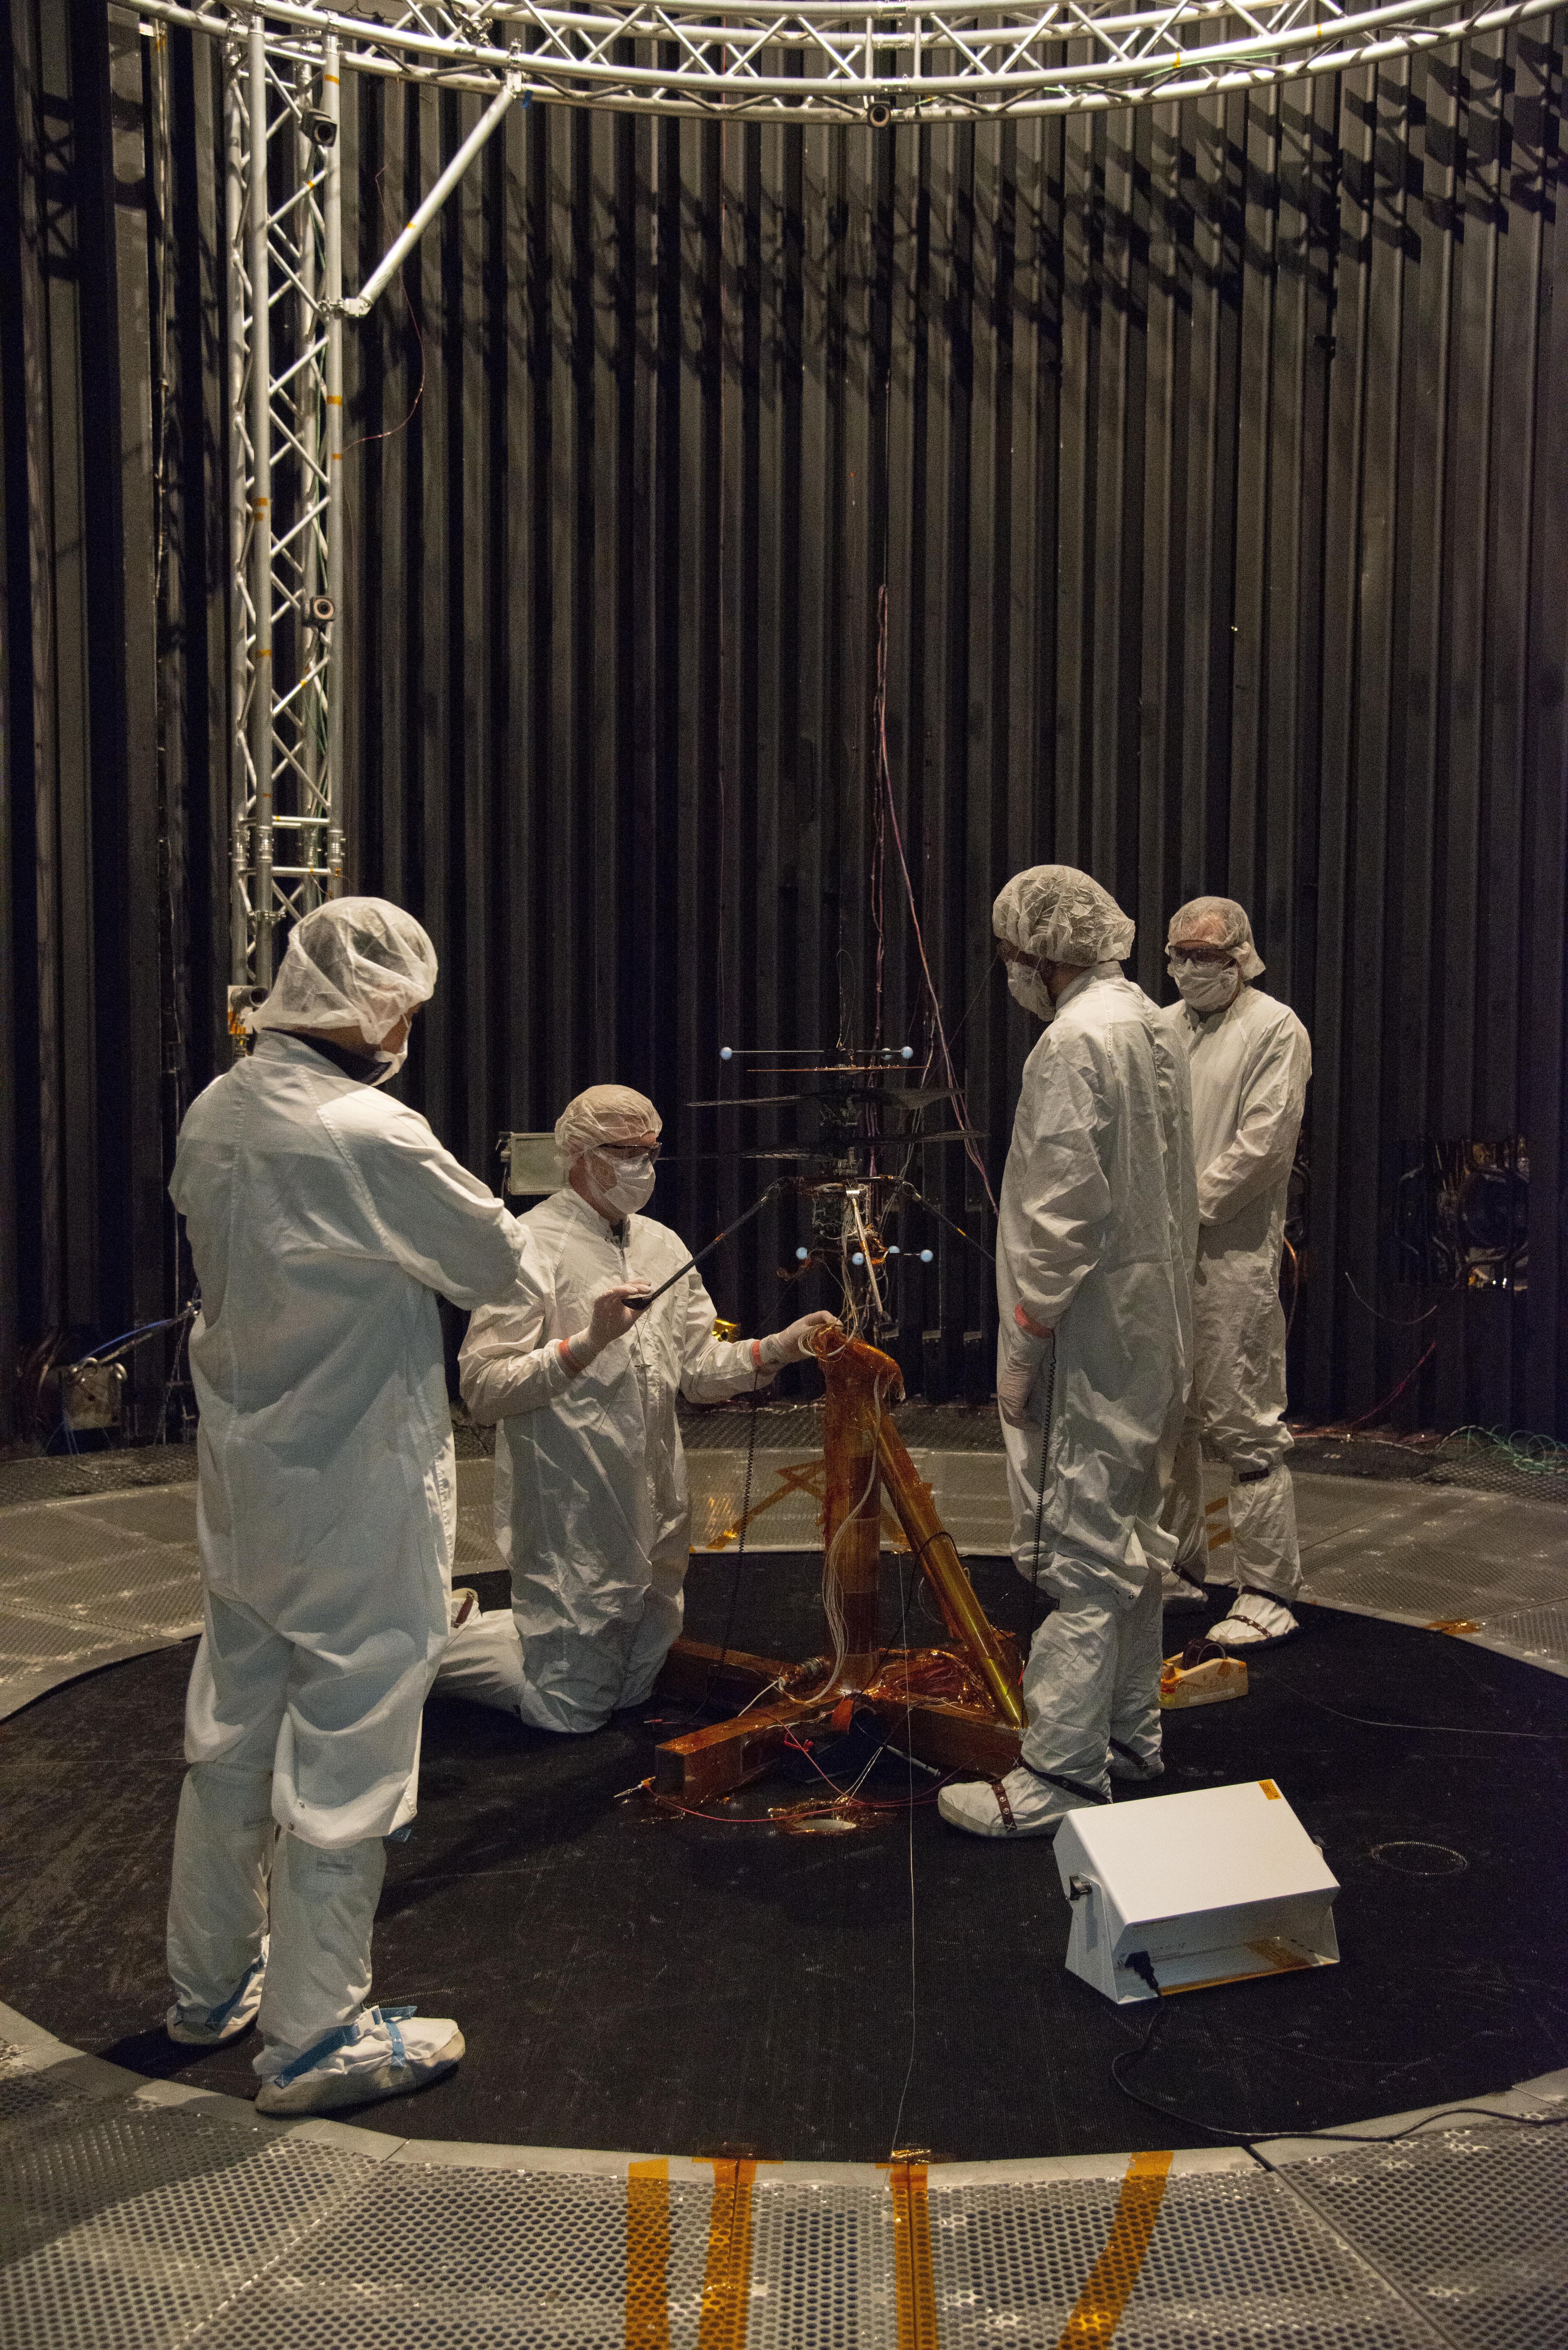 Members of NASAs Mars Helicopter team prepare the flight model for a test in the Space Simulator at NASAs Jet Propulsion Laboratory in Pasadena, California.